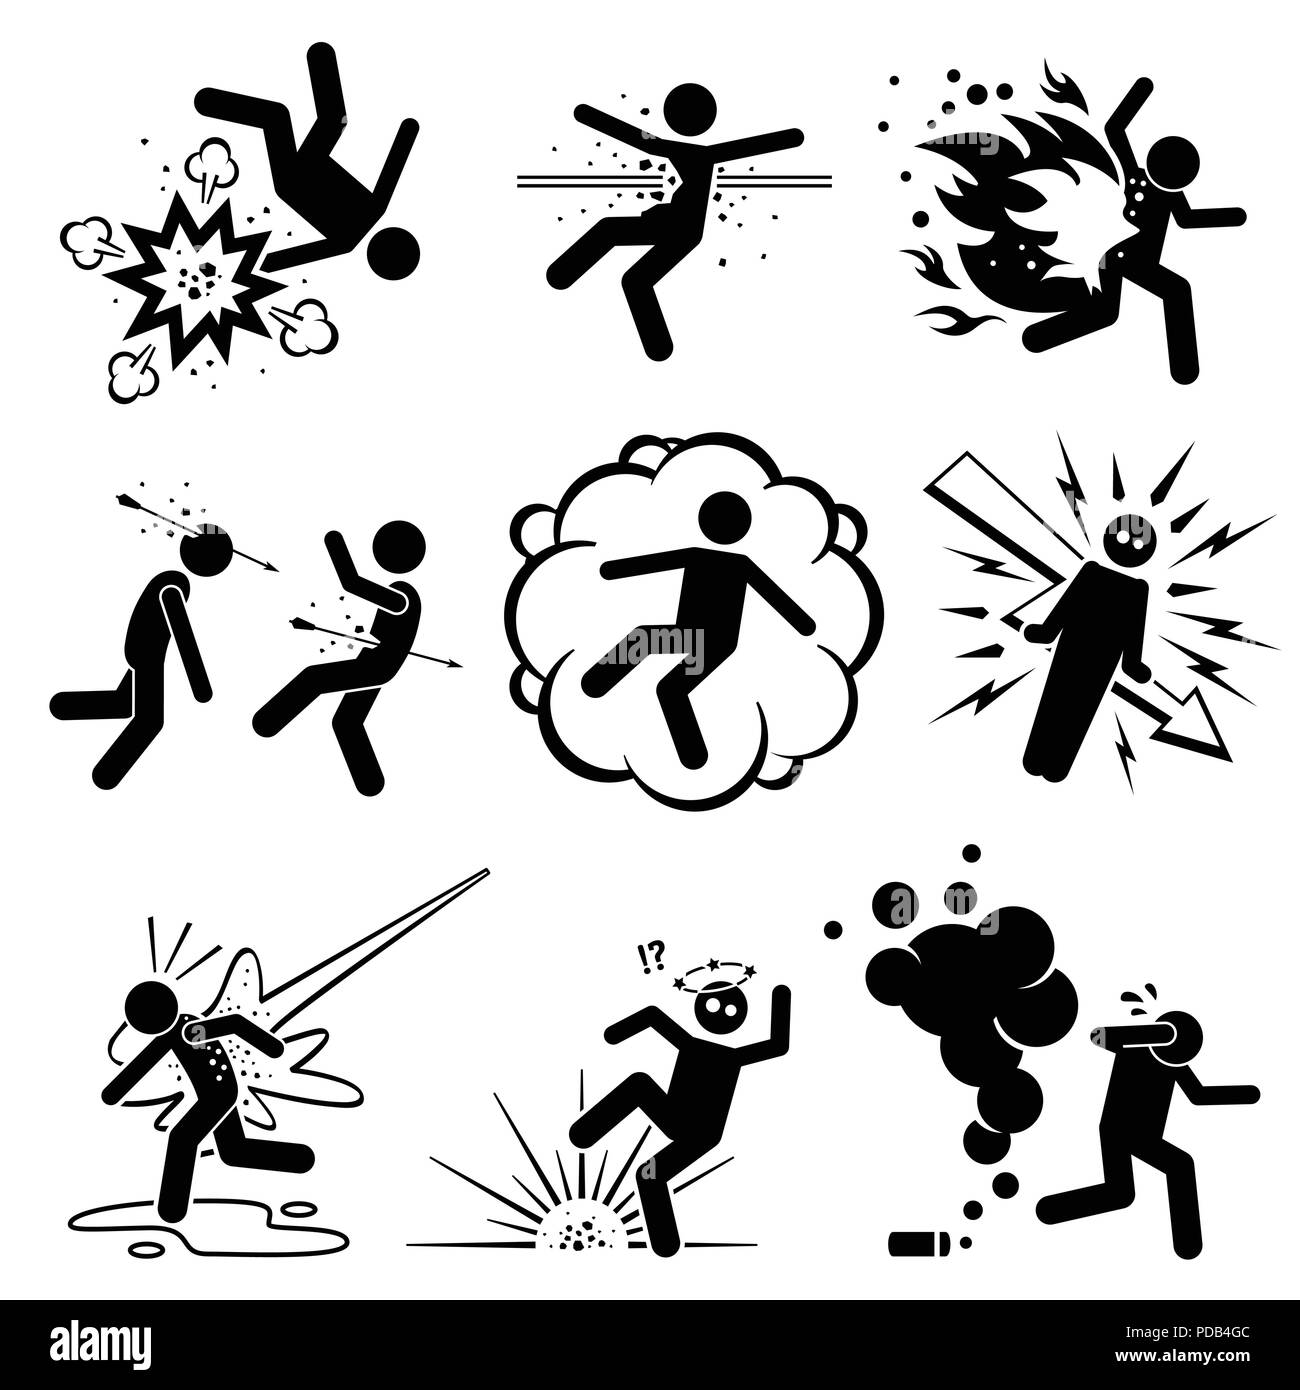 Man killed, shot, and attacked by different type of weapons Stock Vector